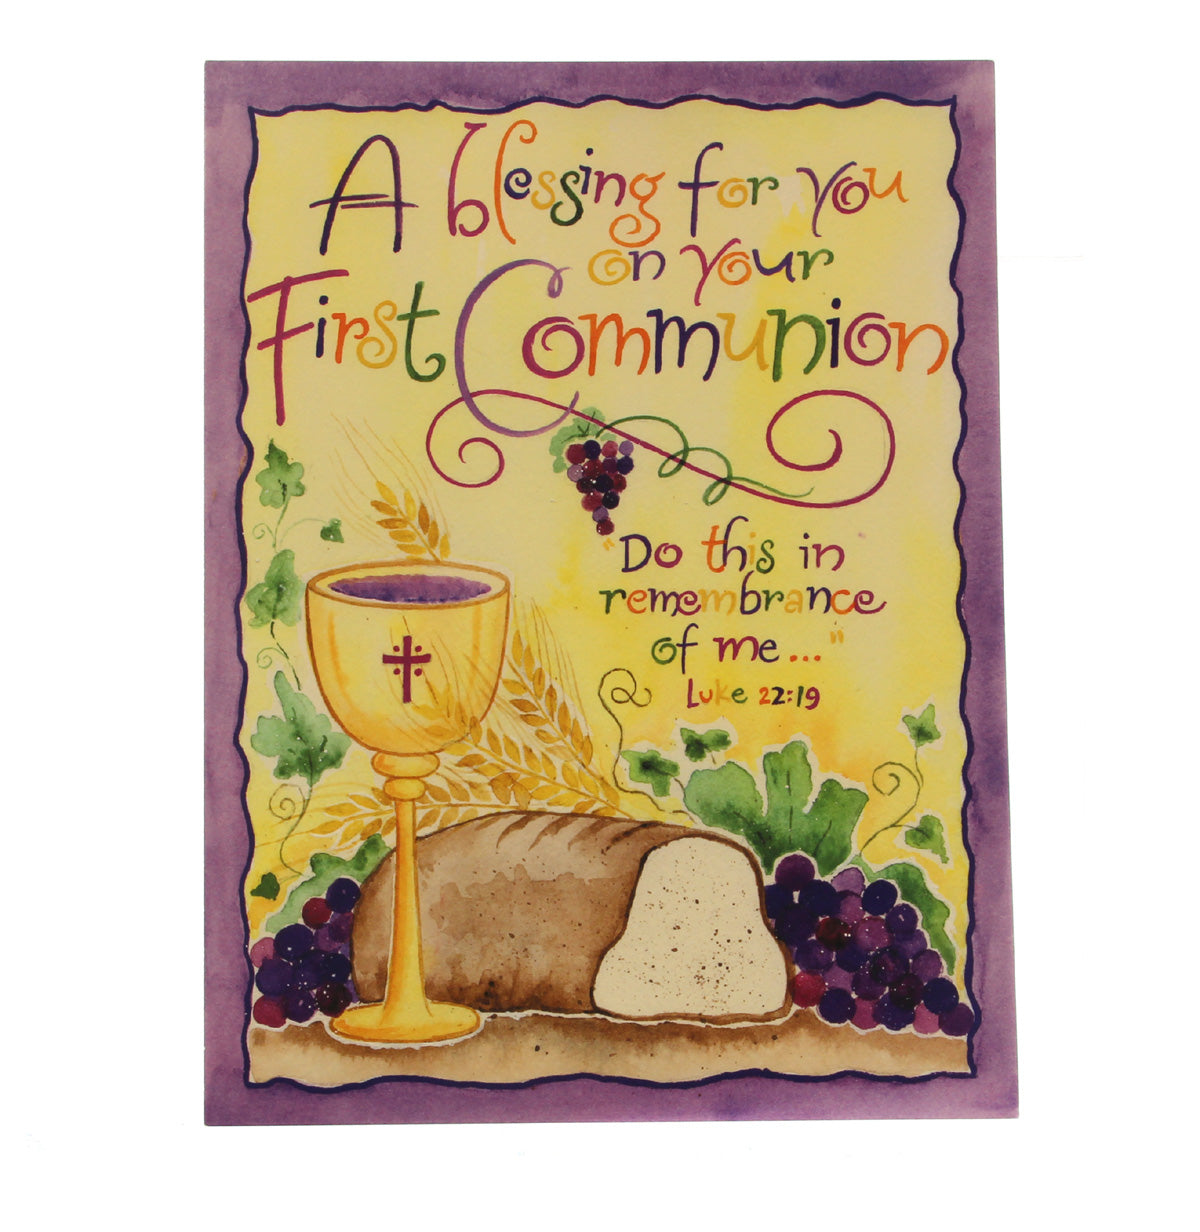 First Communion Card: A blessing for you...